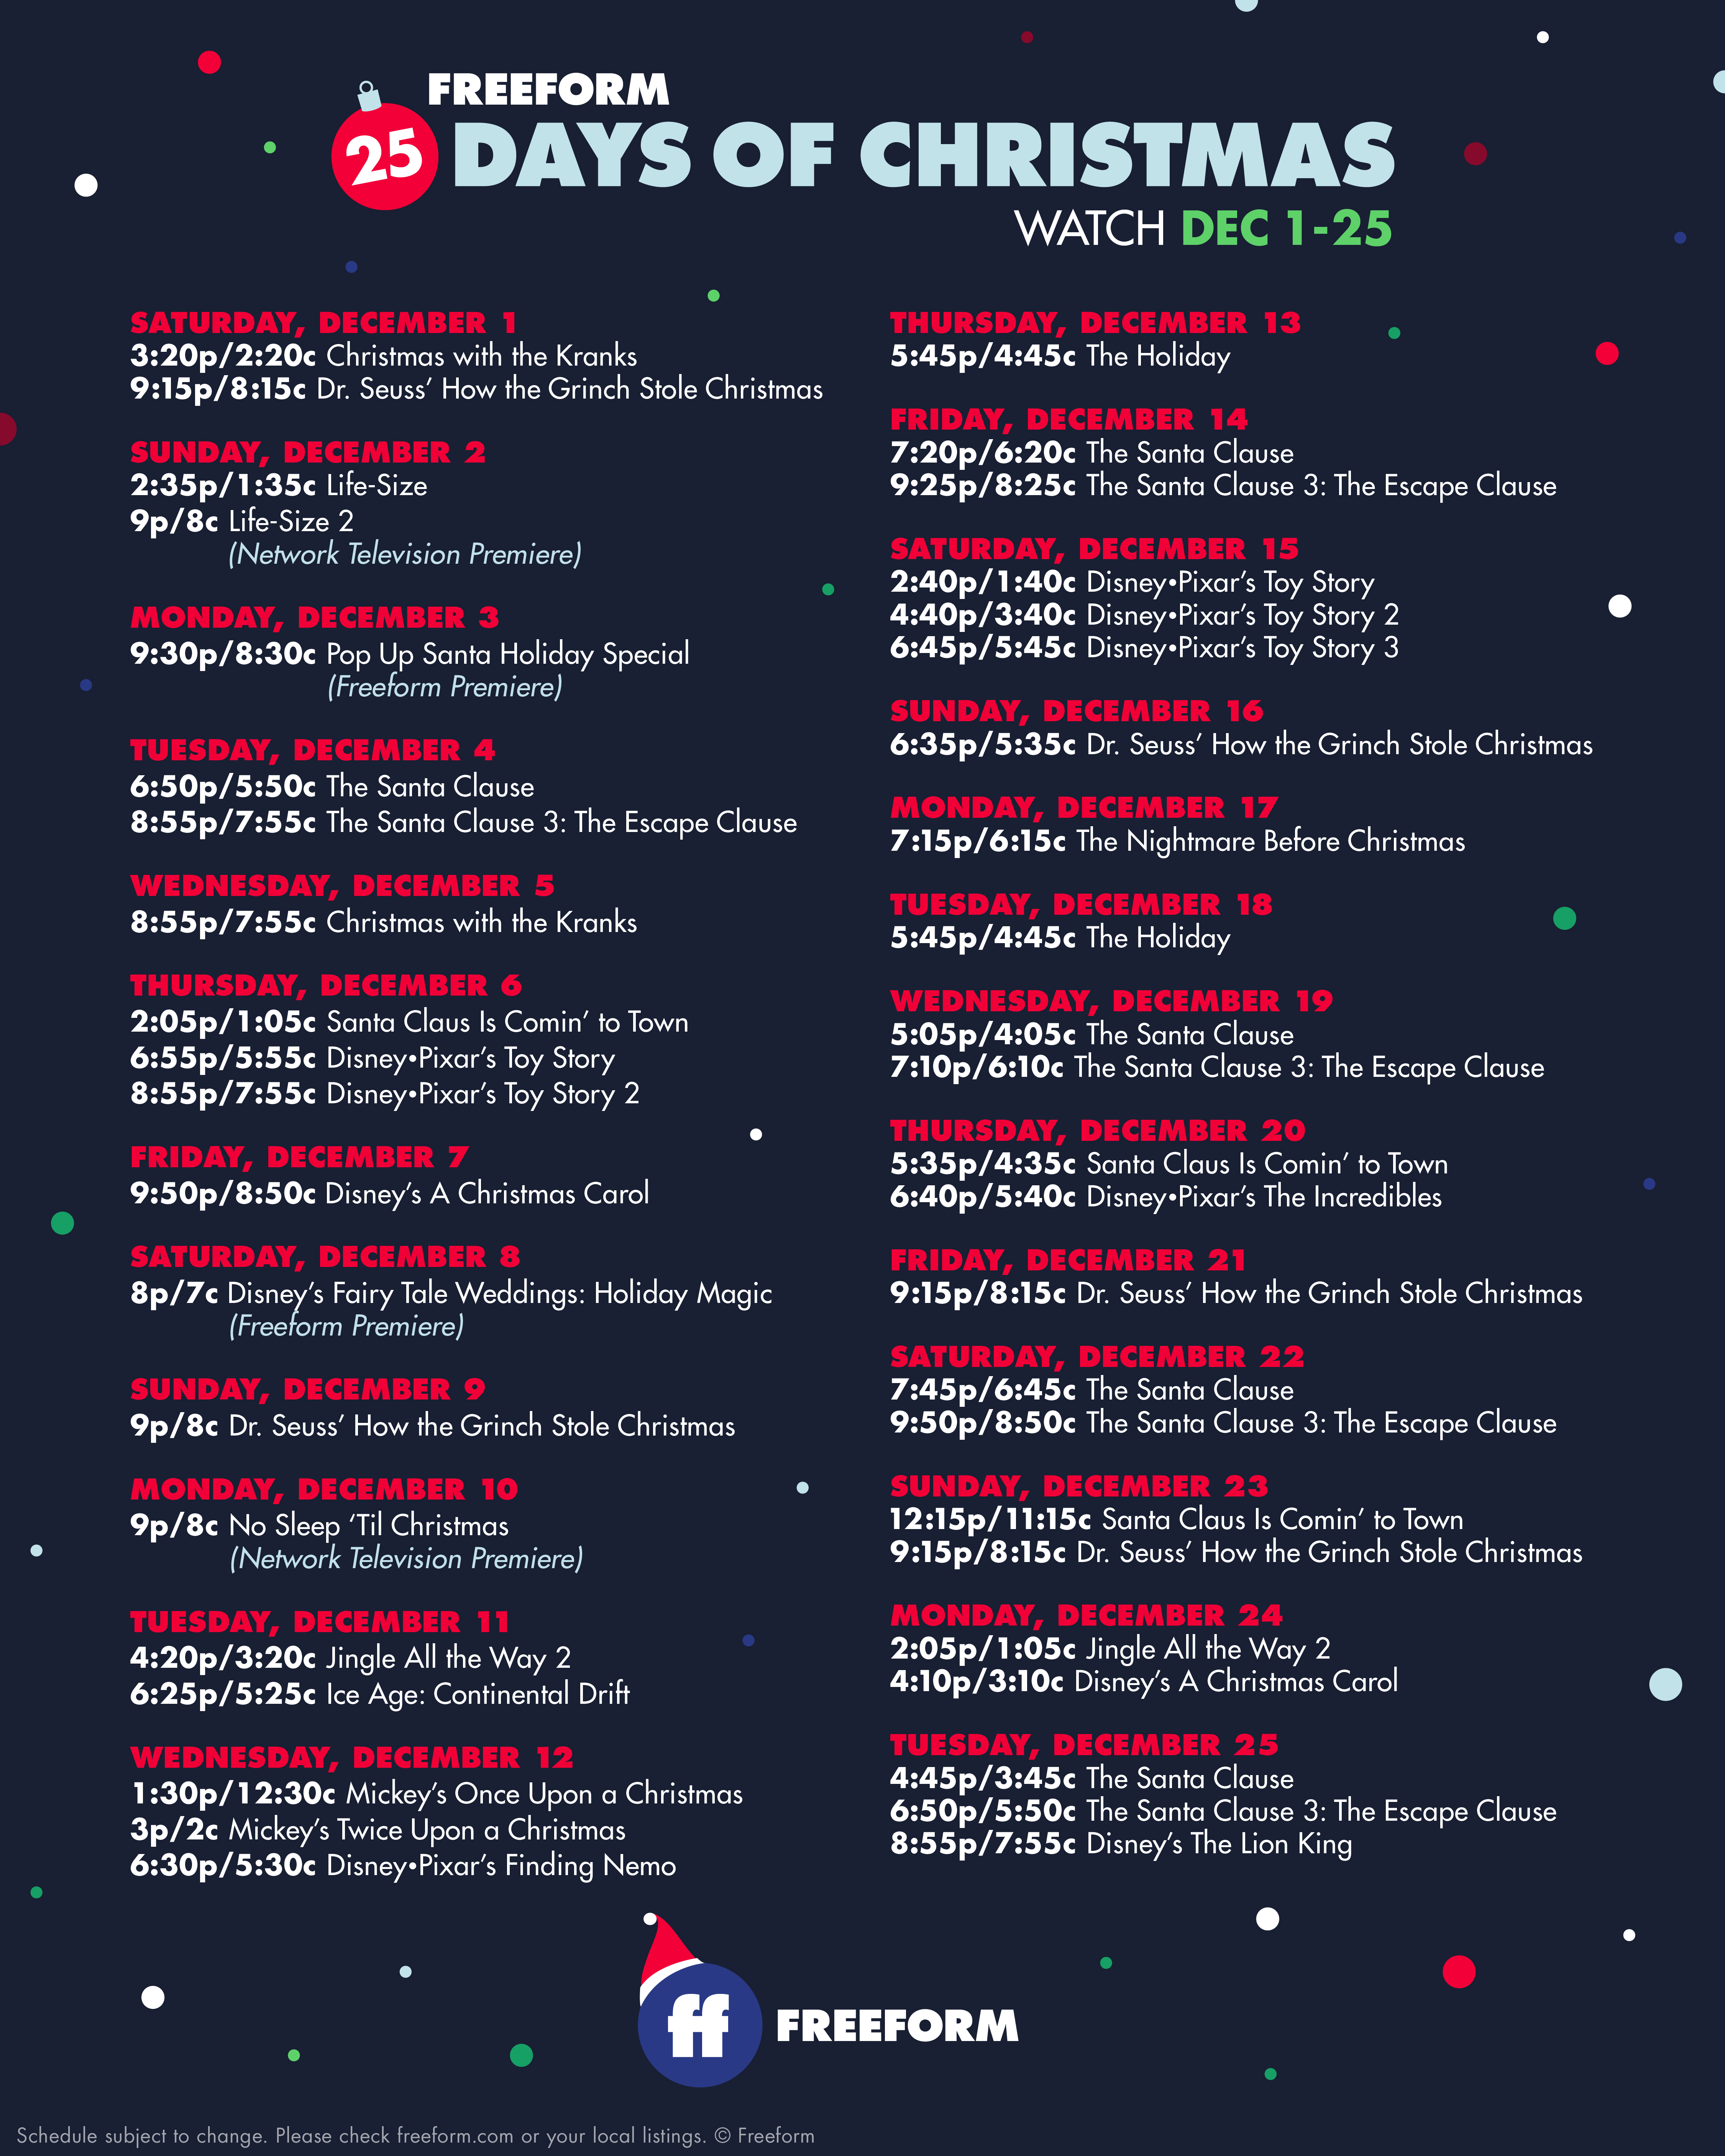 freeform christmas schedule 2020 Freeform S 25 Days Of Christmas And Shareyourears Plus More In News Briefs D23 freeform christmas schedule 2020